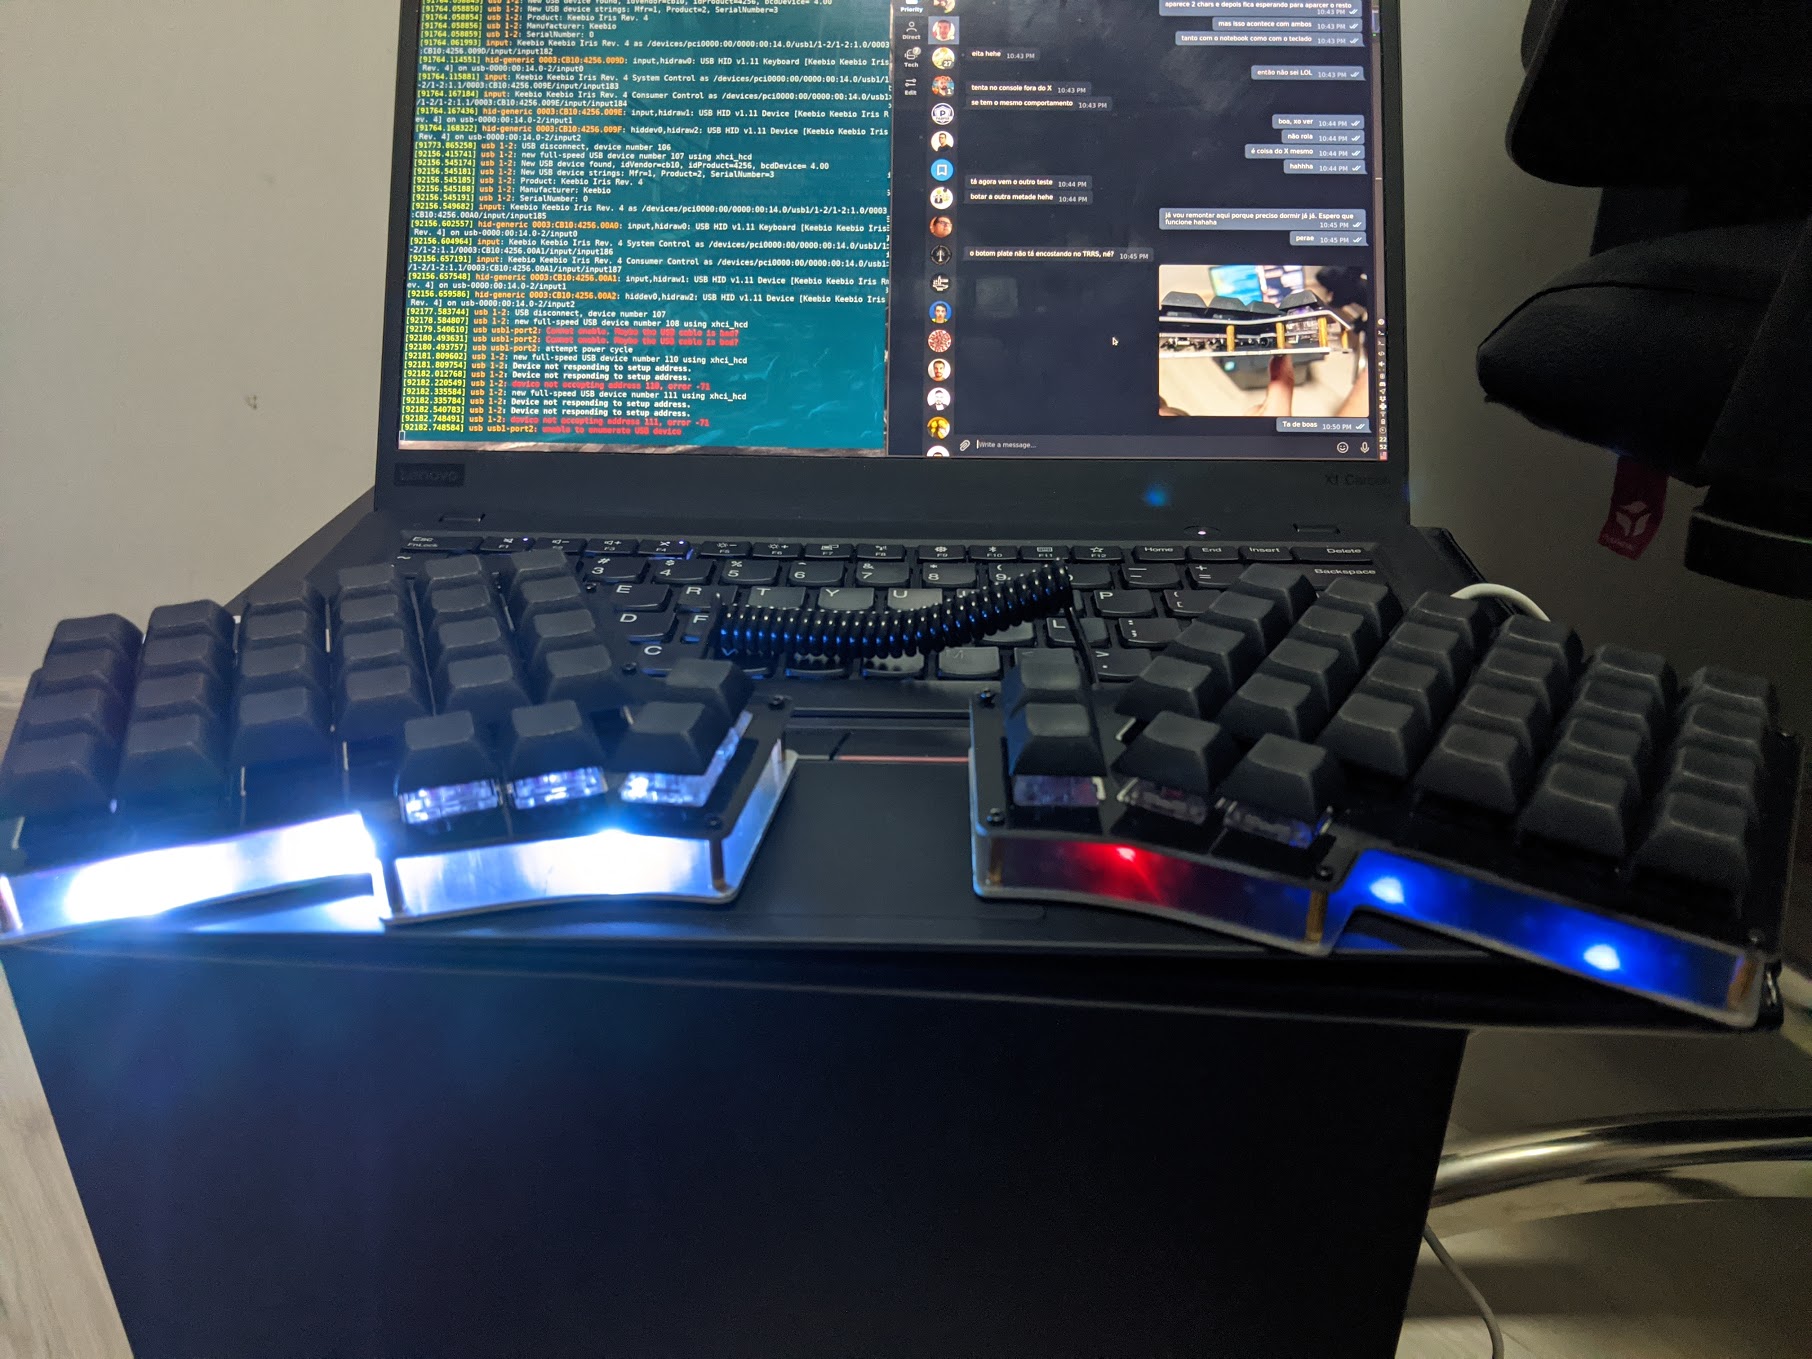 The keyboard with a blue/white LEDs on the left side and a red+blue on the right side. The right side seems to be malfunctioning.